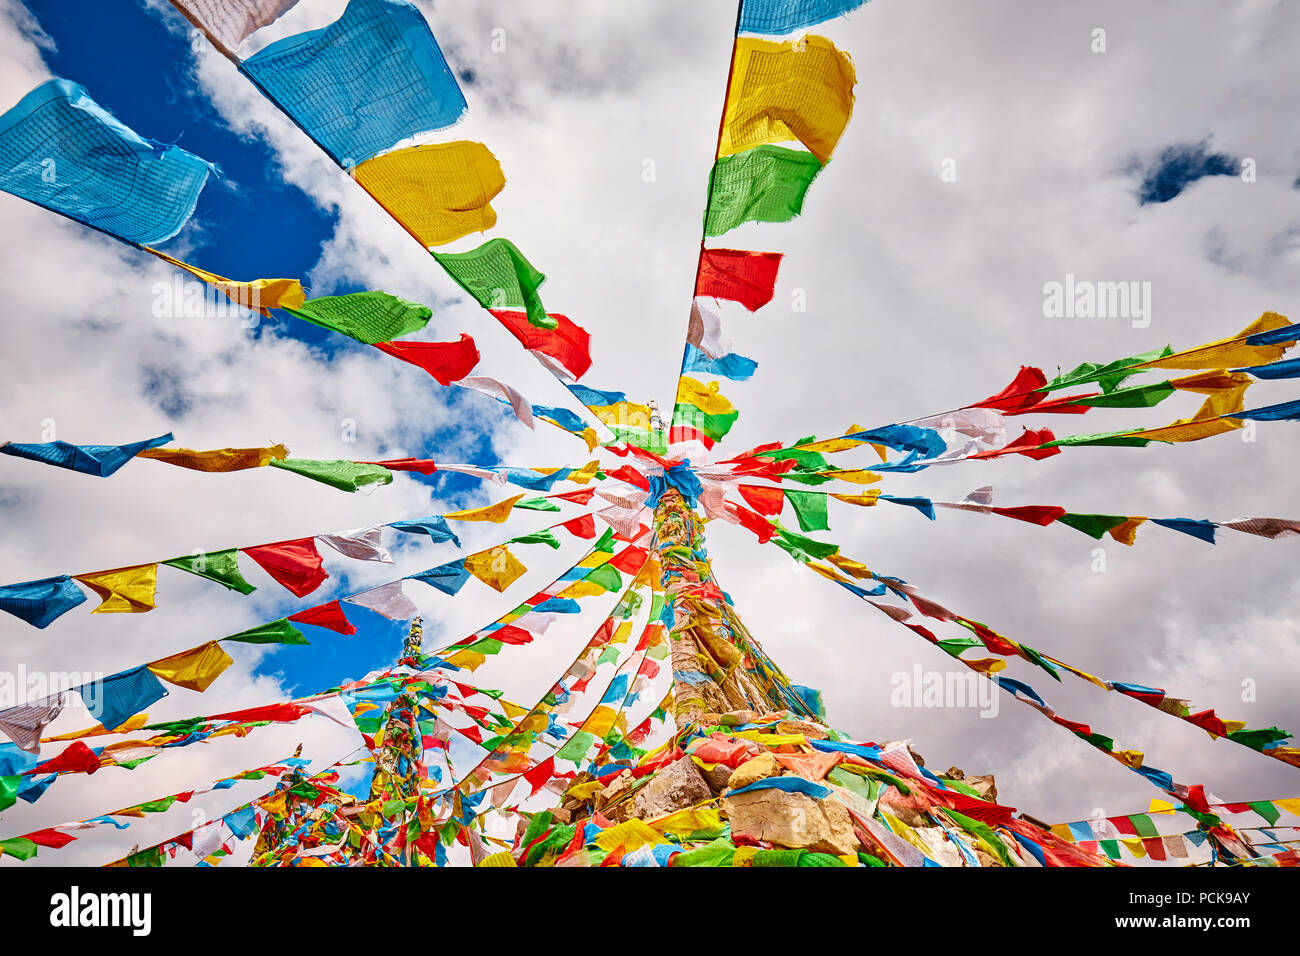 Looking up at Buddhist prayer flags. Tibetans believe the prayers and mantras will be blown by the wind to spread the good will and compassion. Stock Photo